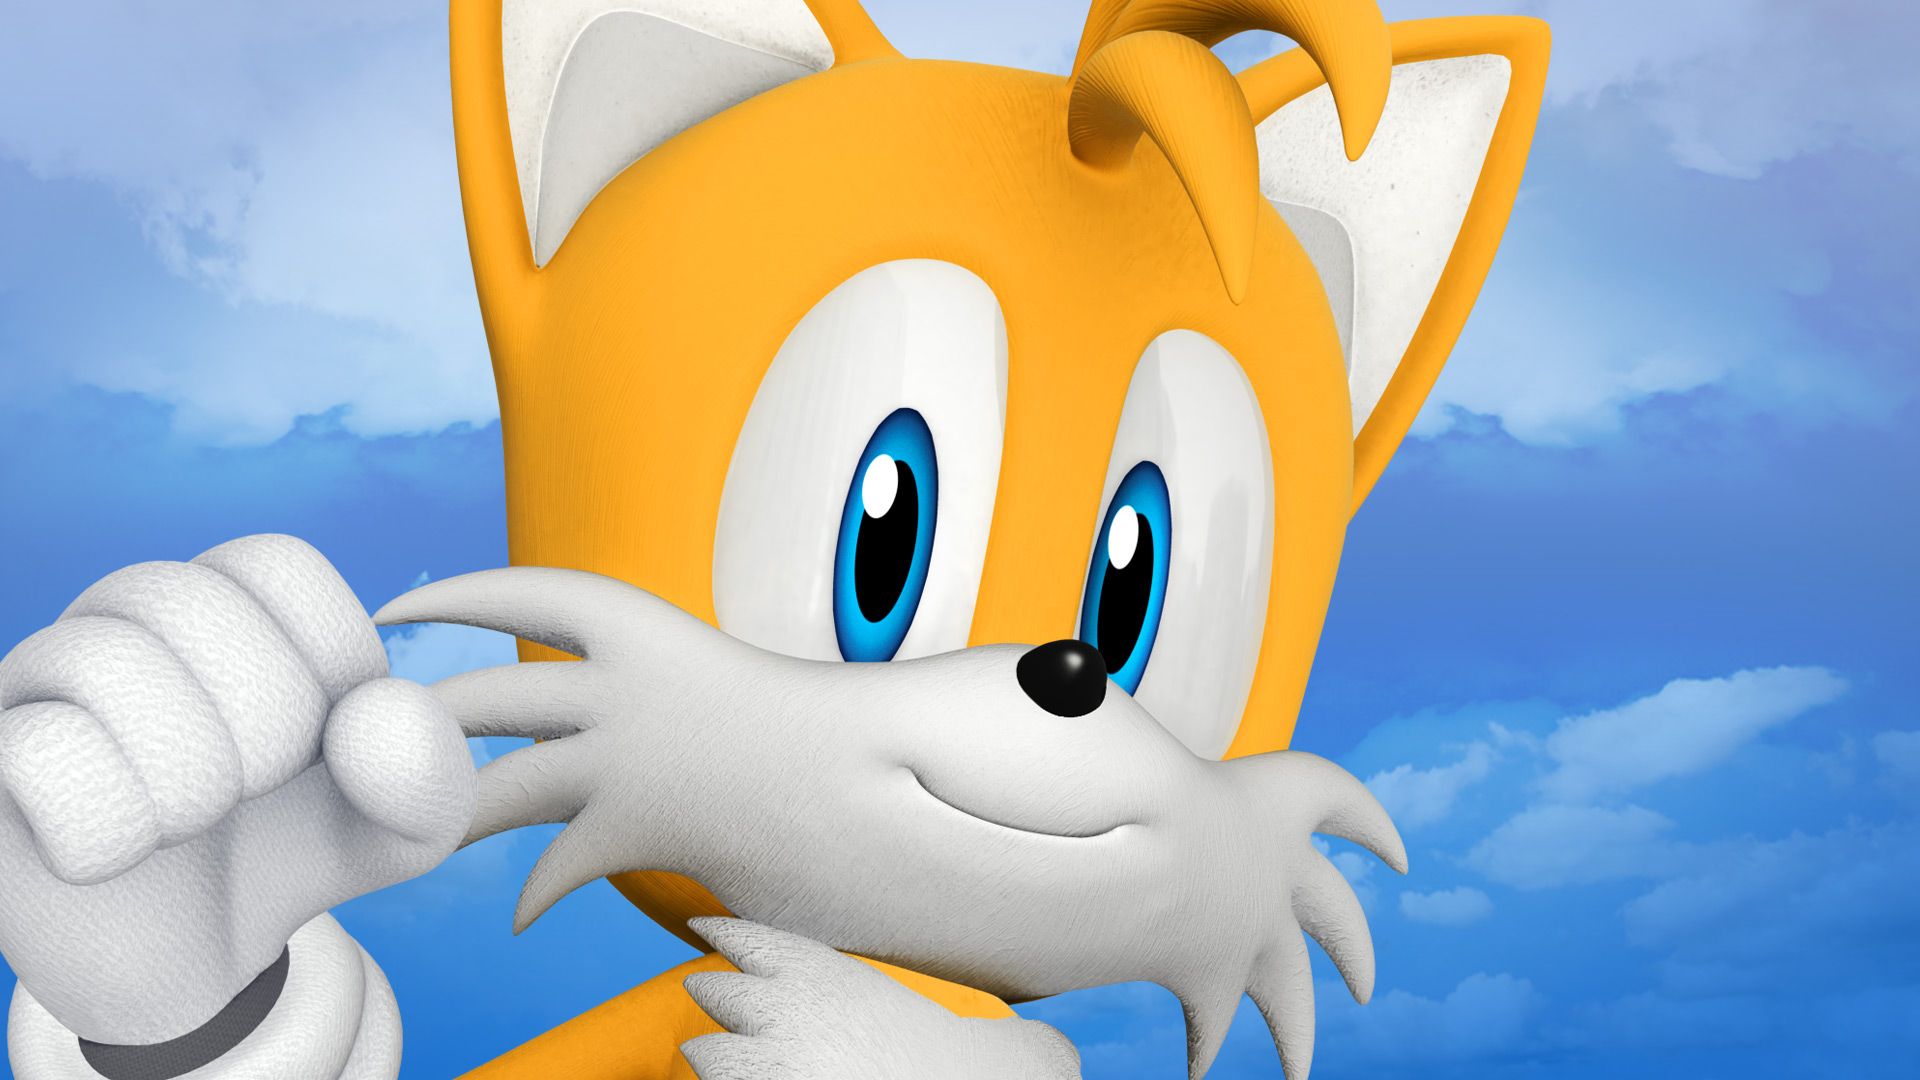 15 Conspiracy Theories About Sonic The Hedgehog